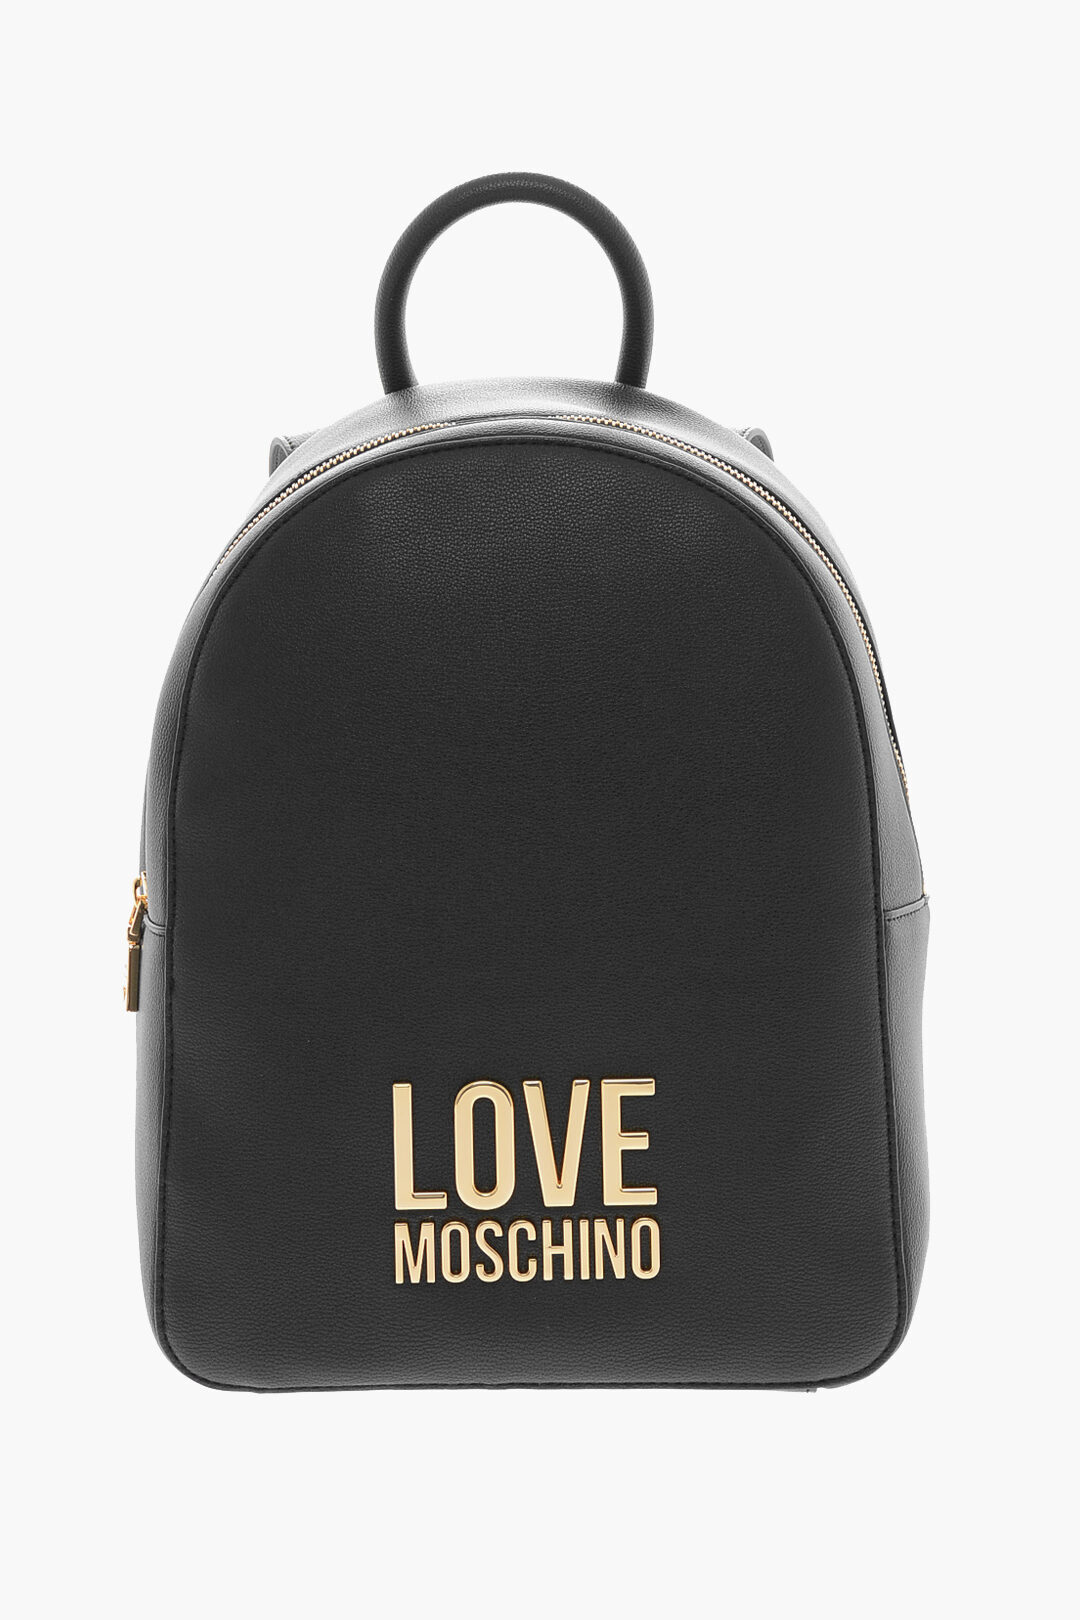 MOSCHINO モスキーノ Black バックパック JC4109PP1GLI0000 レディース LOVE FAUX LEATHER  BACKPACK WITH GOLDEN EMBOSSED MAXI LOGO FR 【関税・送料無料】【ラッピング無料】 dk | 